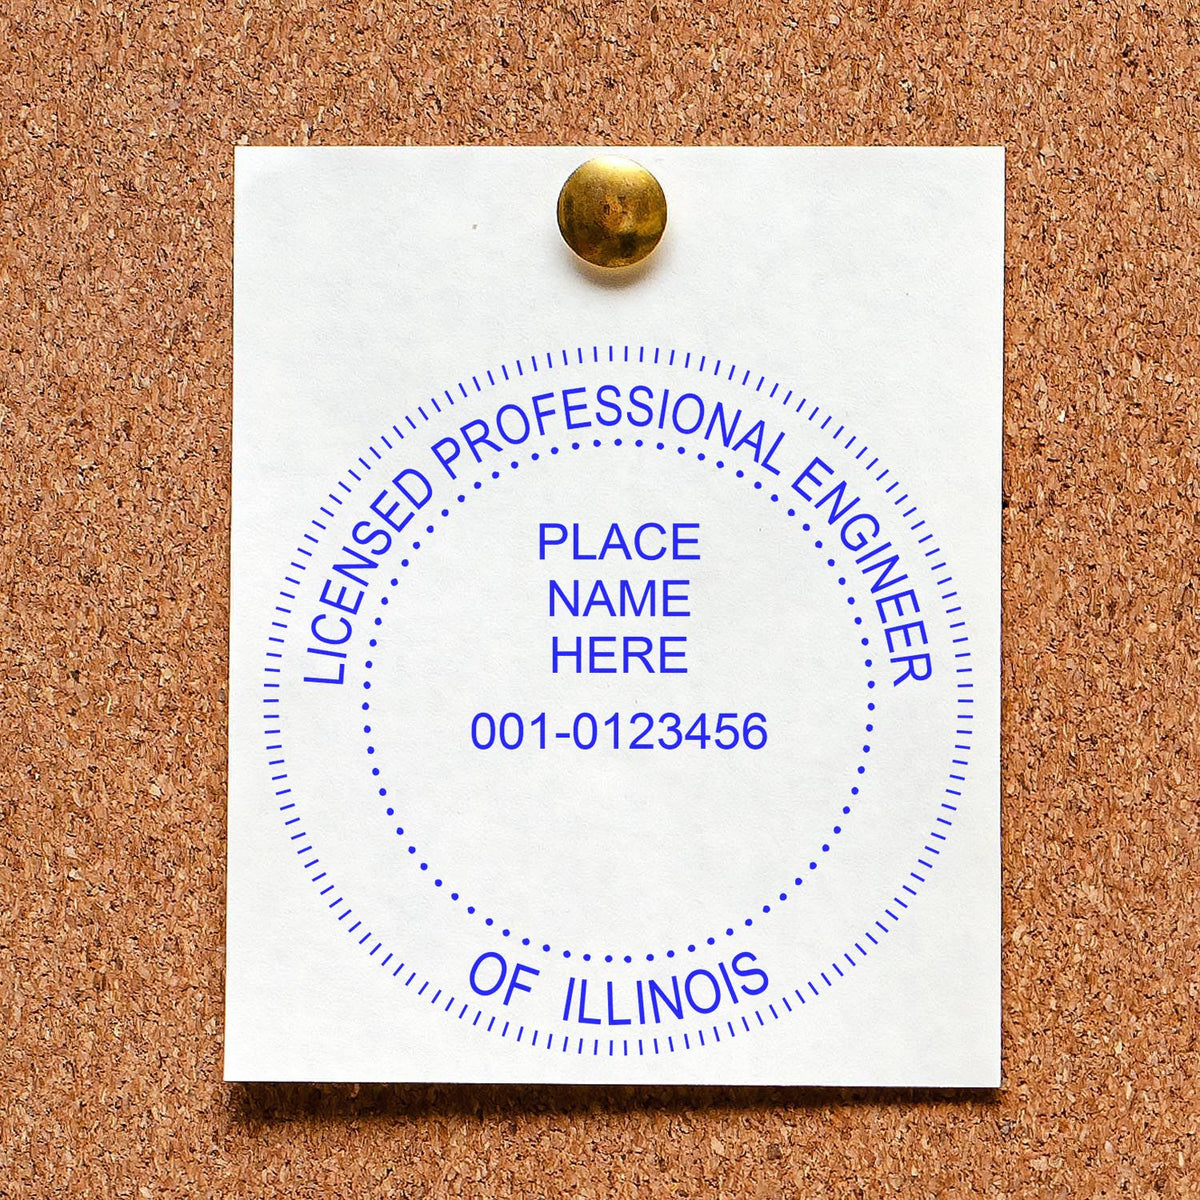 The Digital Illinois PE Stamp and Electronic Seal for Illinois Engineer stamp impression comes to life with a crisp, detailed photo on paper - showcasing true professional quality.